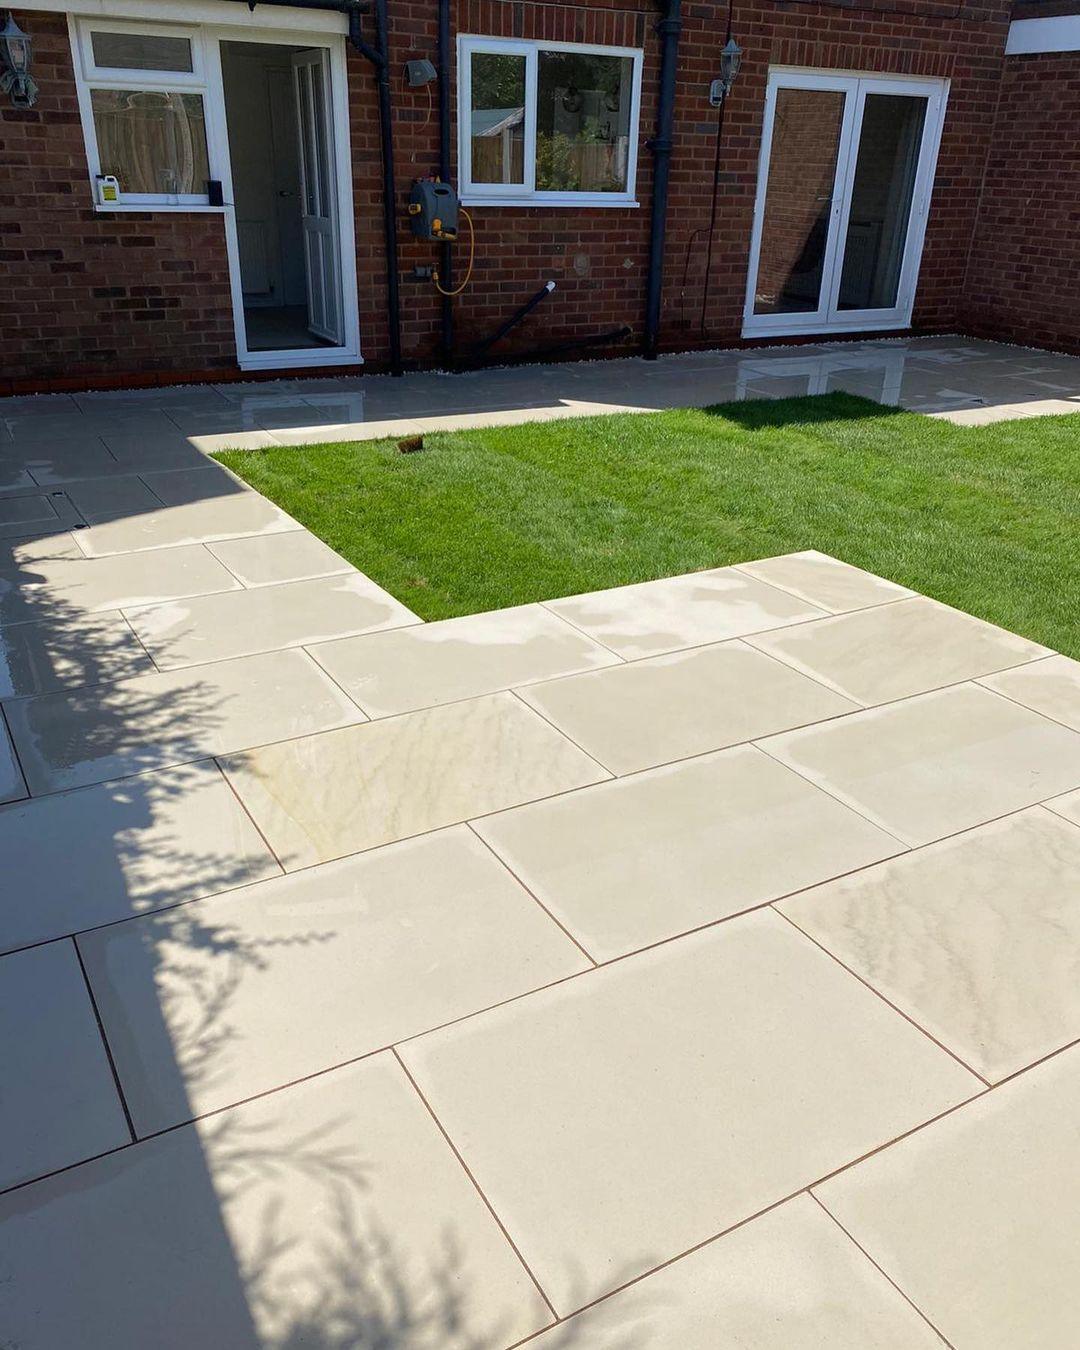 Mint Indian Sandstone Paving Slabs - Sawn & Honed - 900x600 - 20mm - Smooth Paving - UniversalPaving